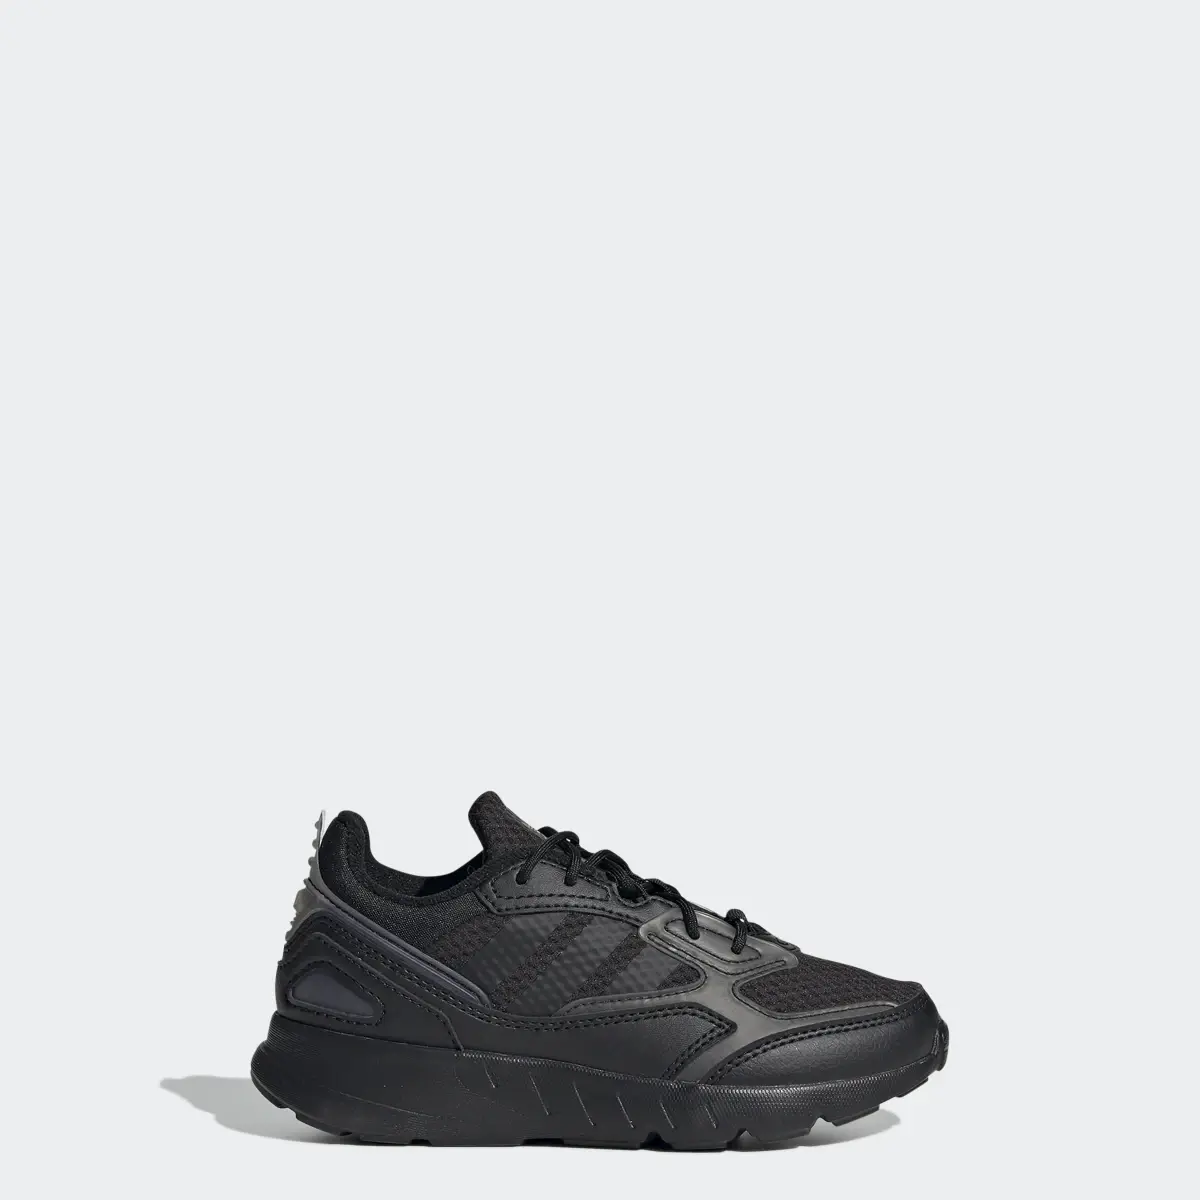 Adidas ZX 1K 2.0 Shoes - GY5458